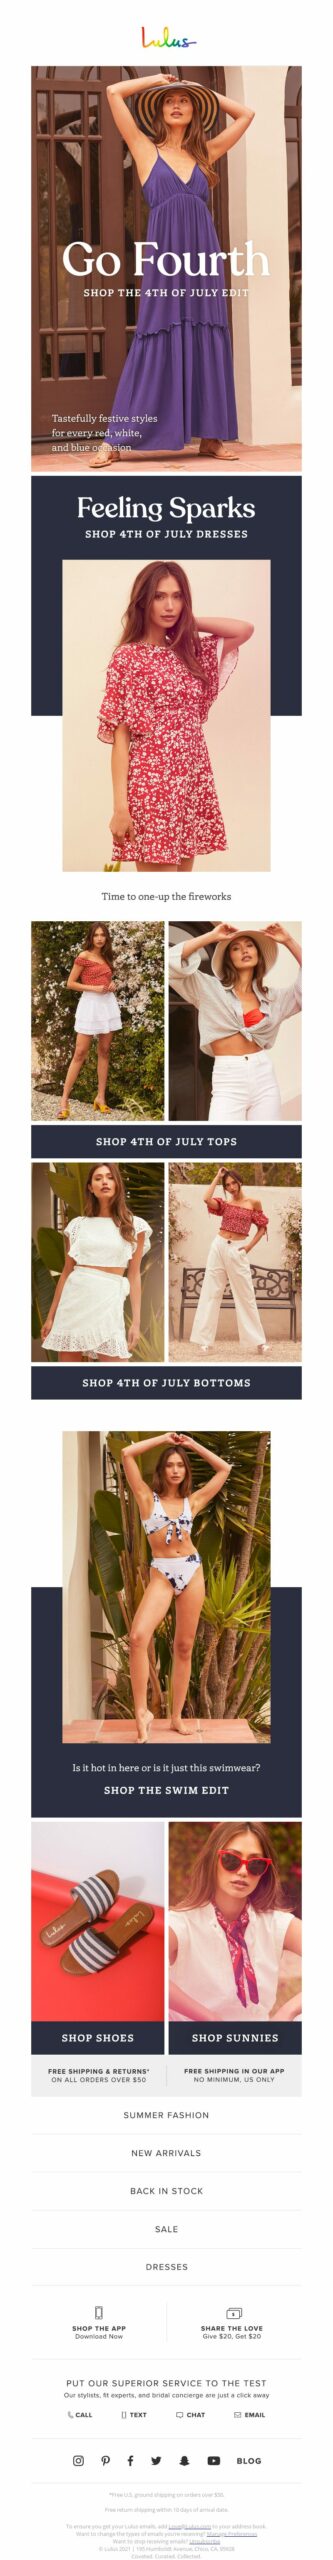 Vineyard Vines, 4th July email marketing campaign. 